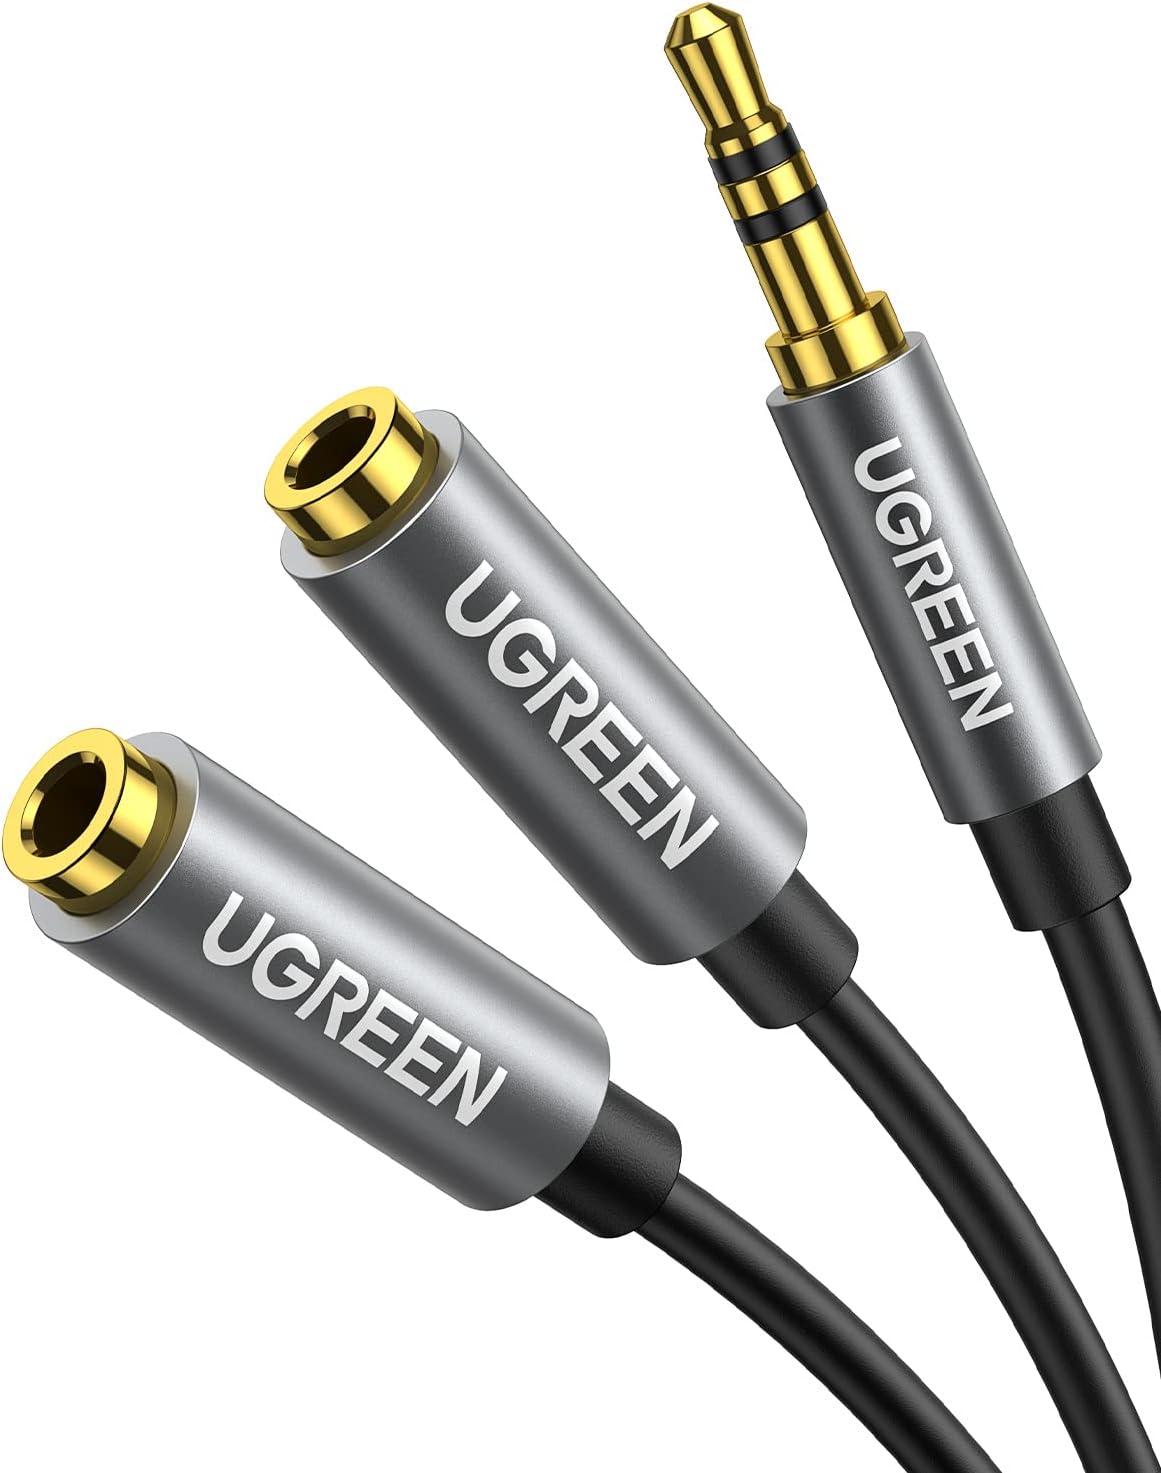 A splitter cable that splits one stereo into two stereo